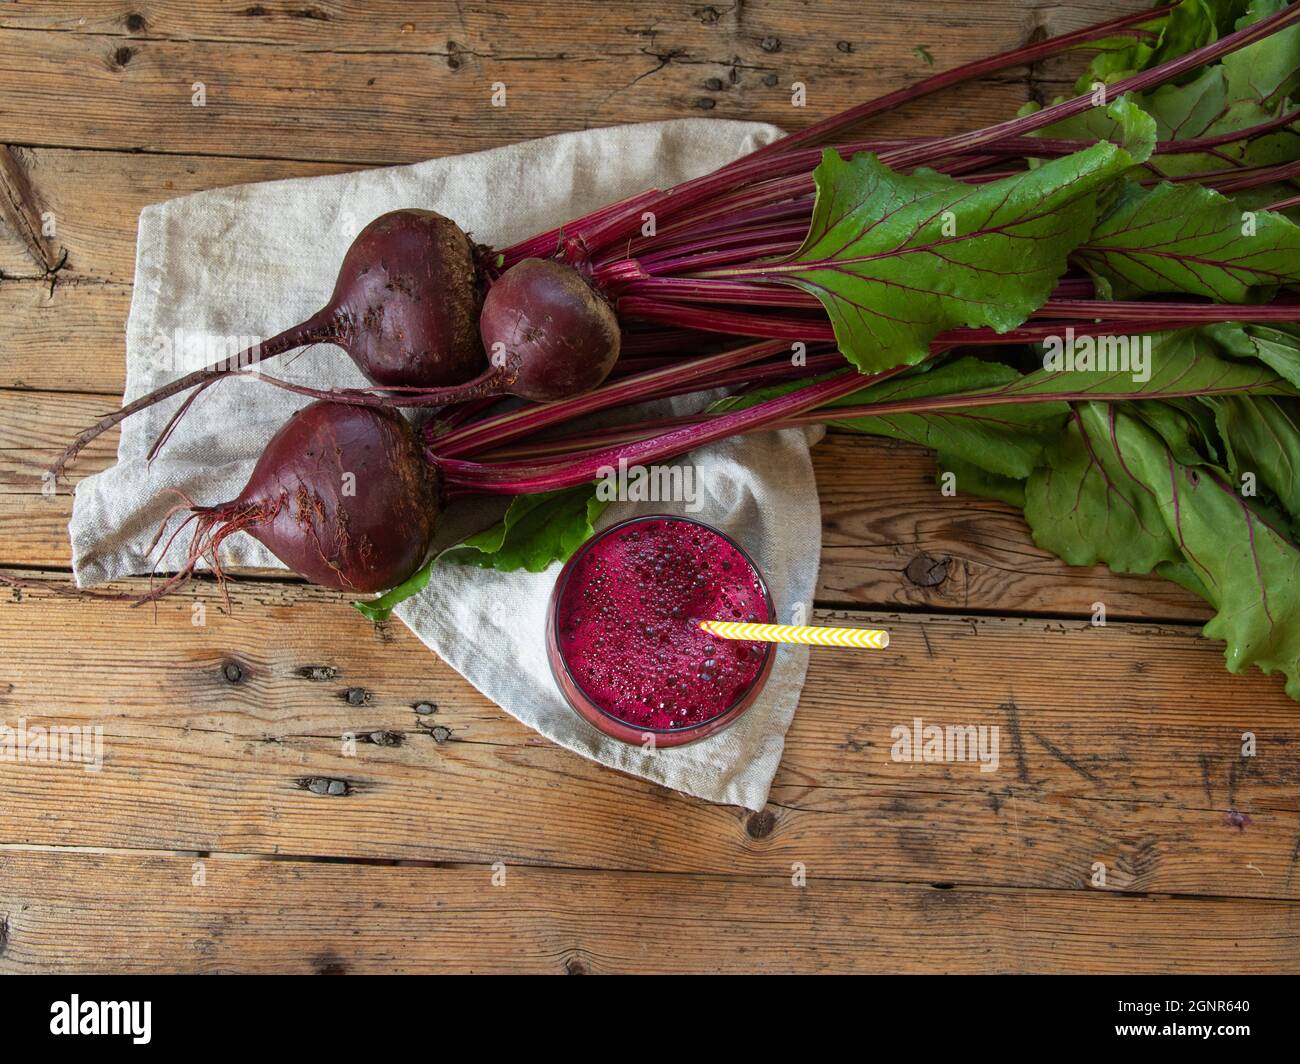 Fresh smoothie squeezed  beetroot juice in a glass on a wooden surface  Healthy eating, detox, dieting and vegetarian concept. Stock Photo